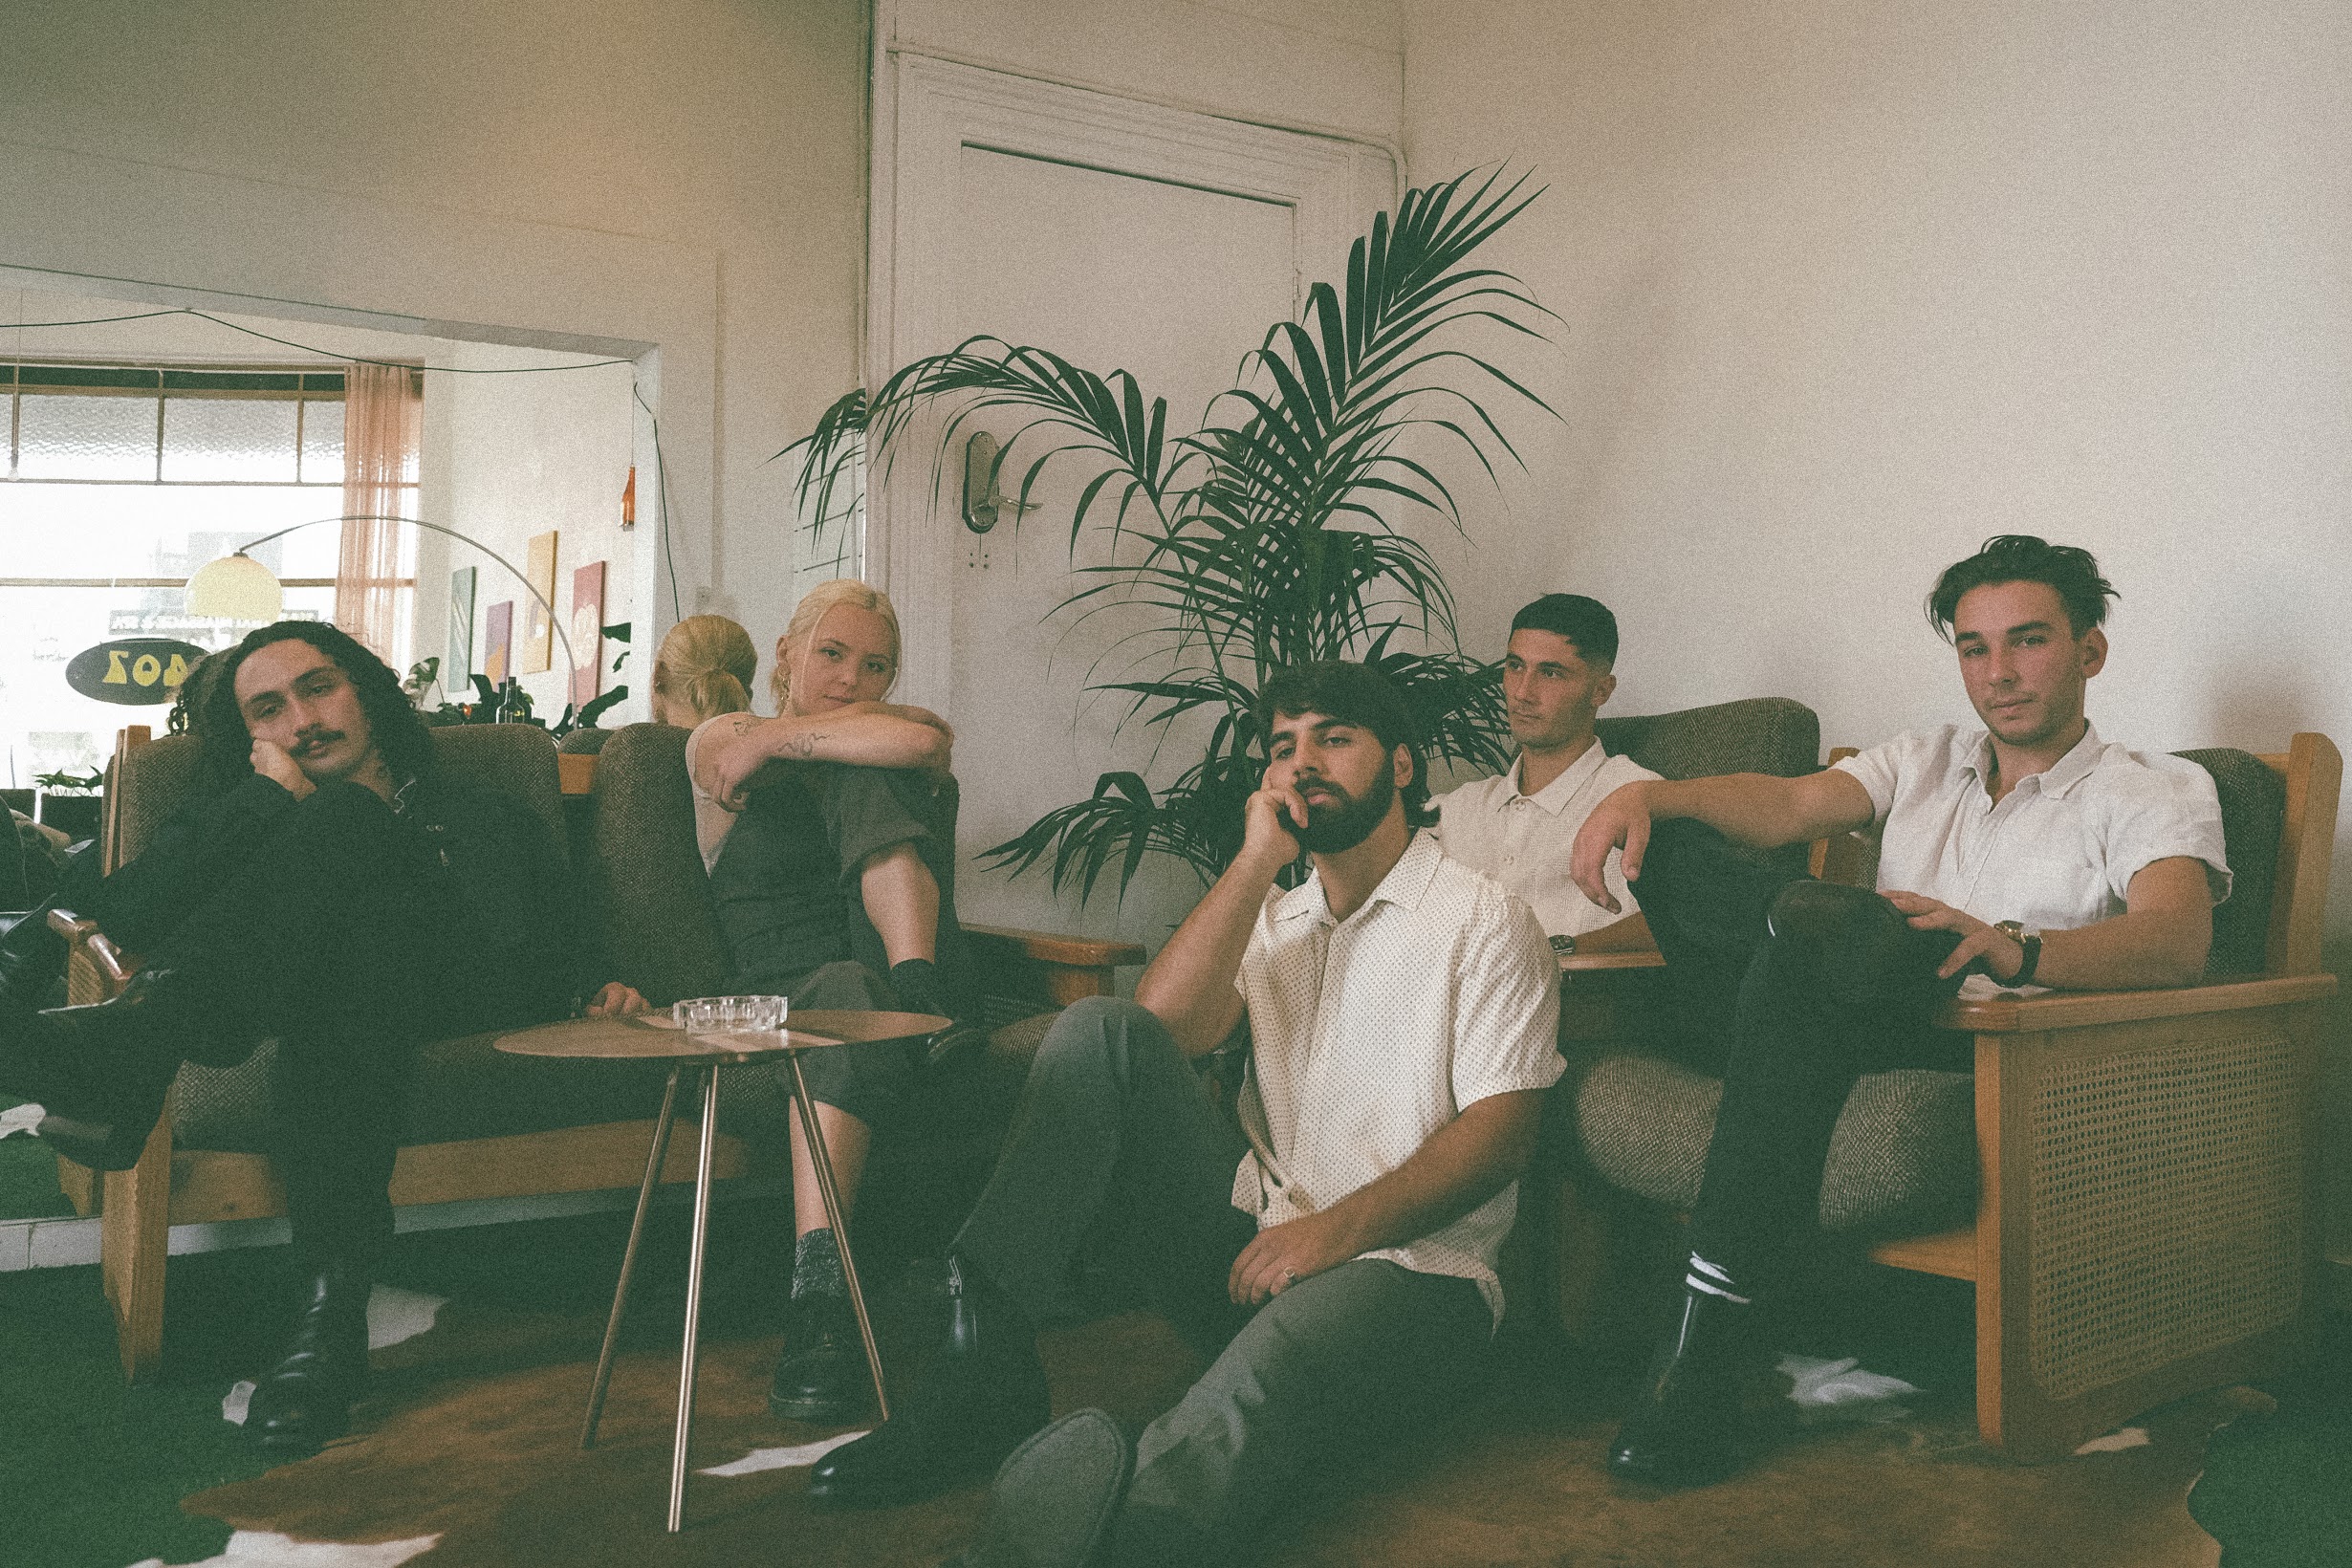 MELBOURNE BAND MANTELL TEAM UP WITH STELLA DUNAI ON ETHEREAL SINGLE ‘DEAR MIA’ OUT NOW